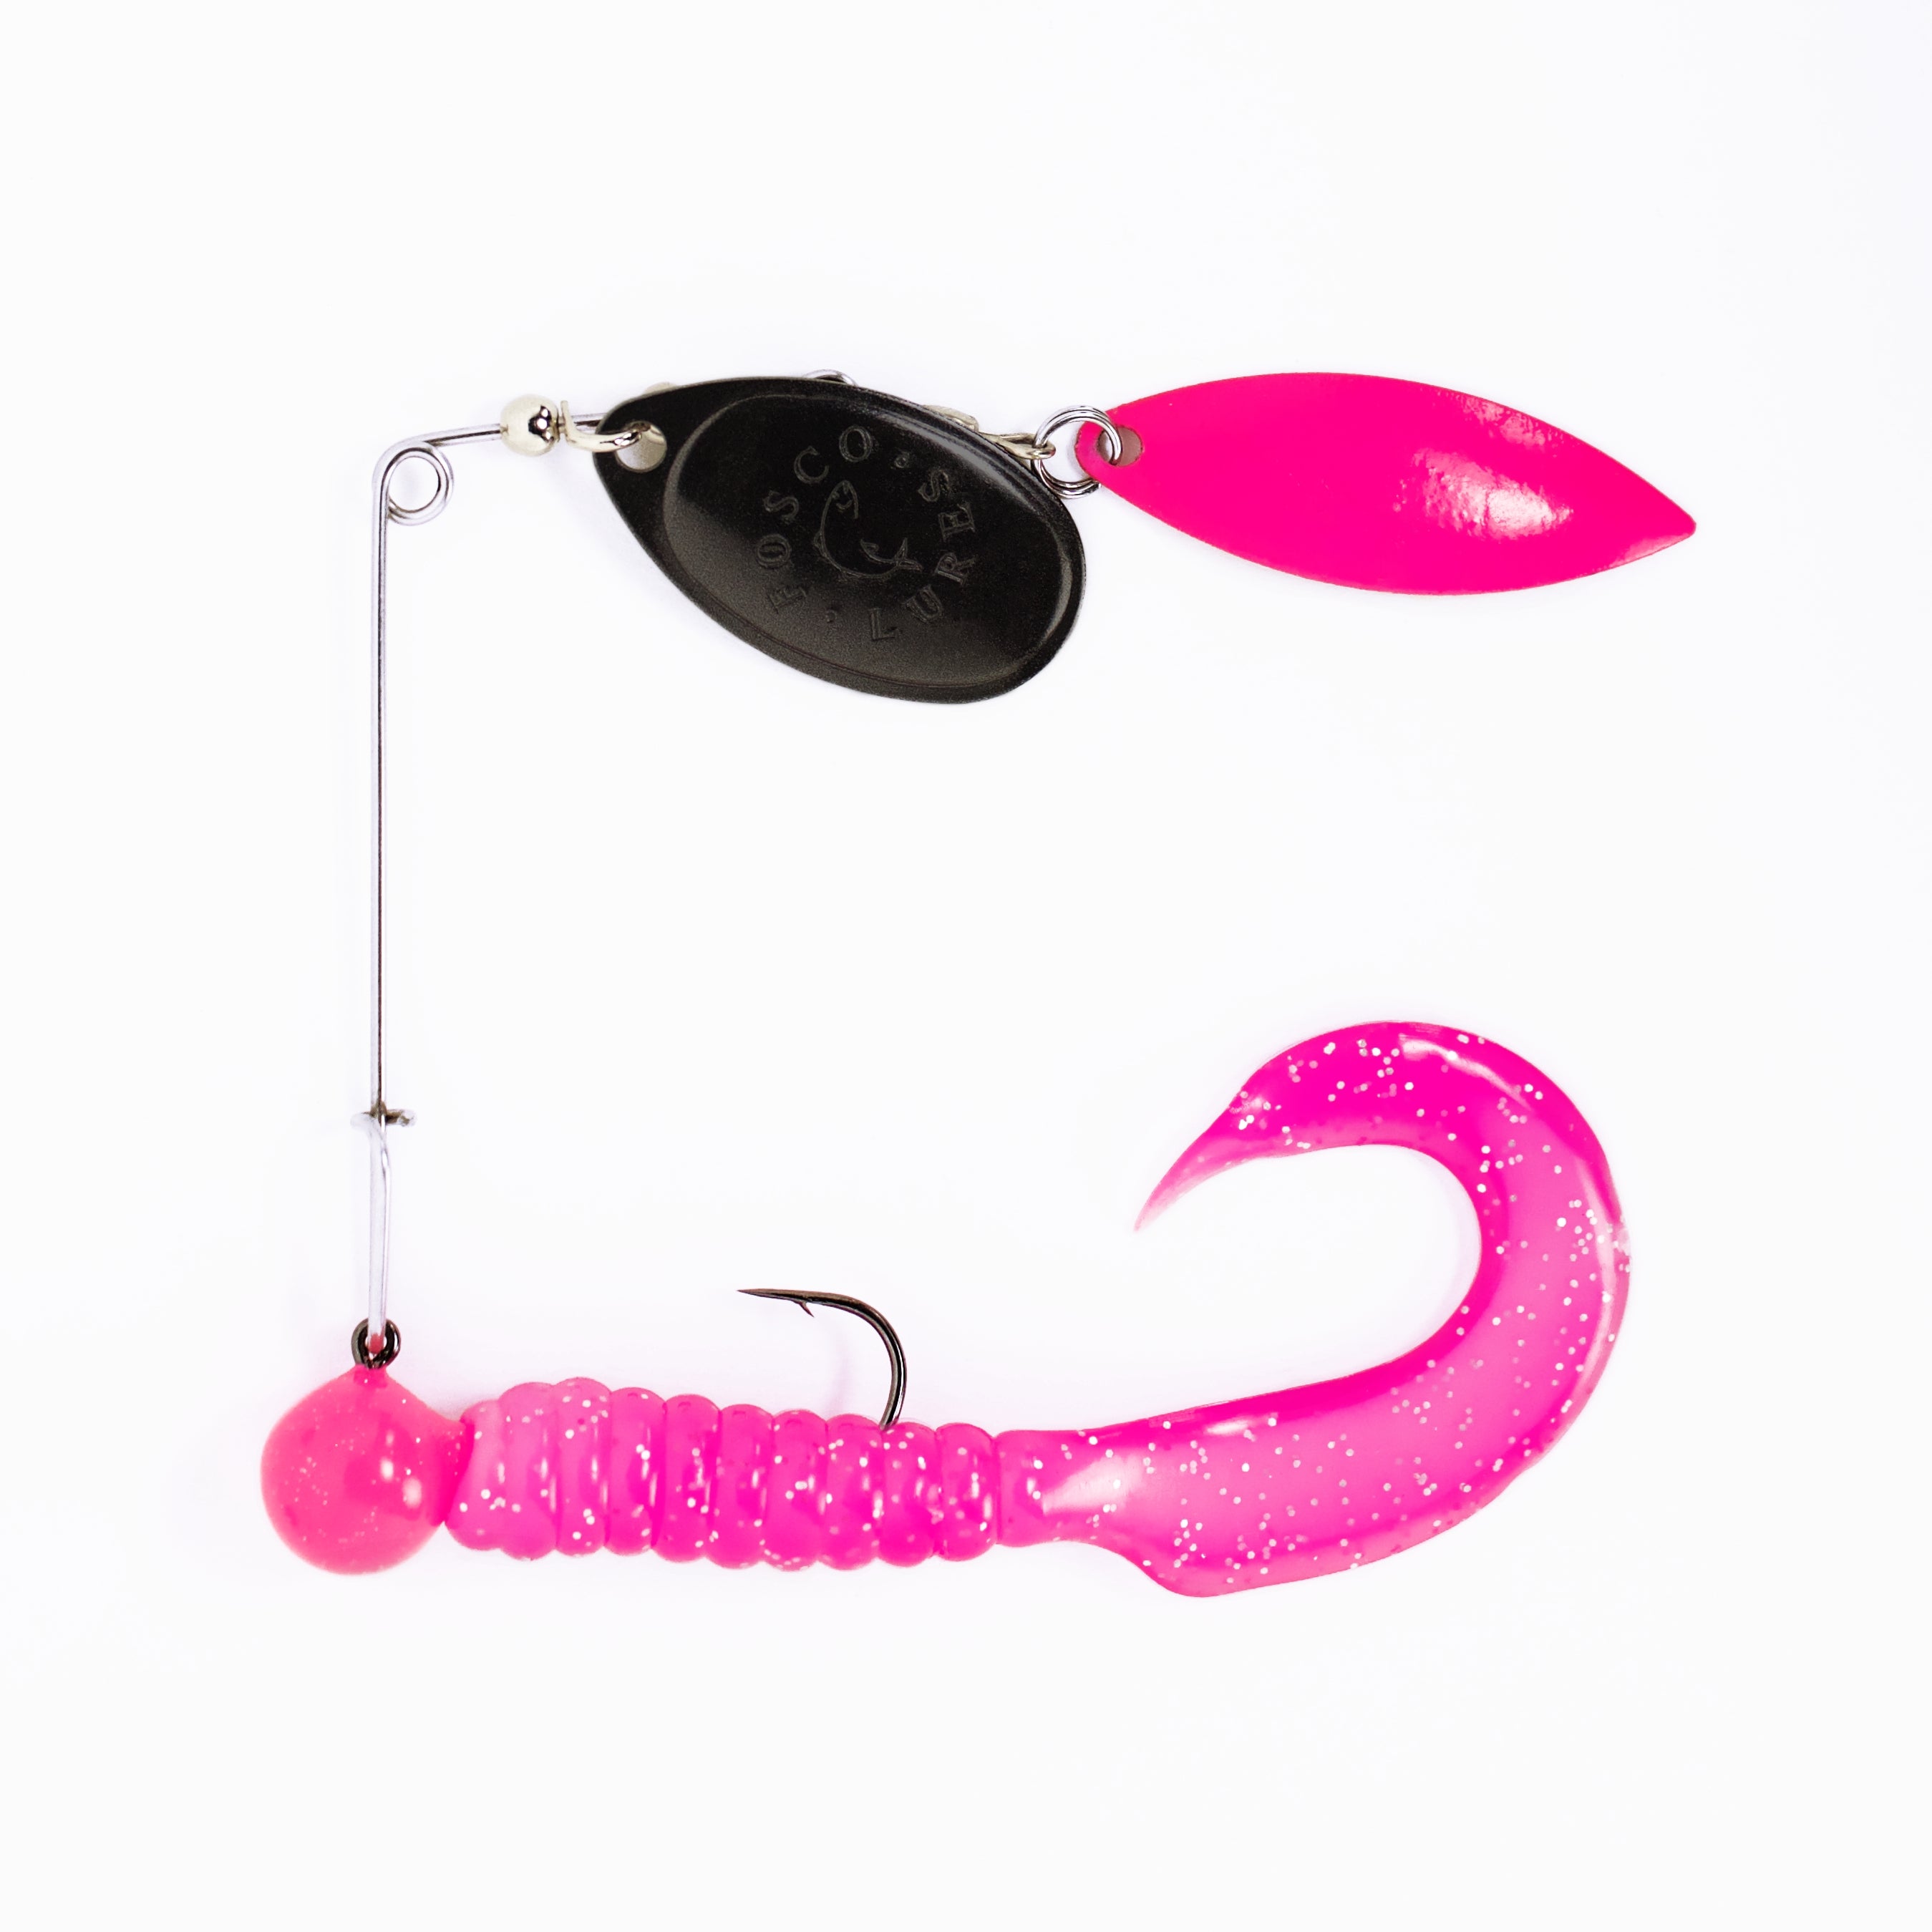 Jig Spinner • Pink • #3 (plastic bait not included)